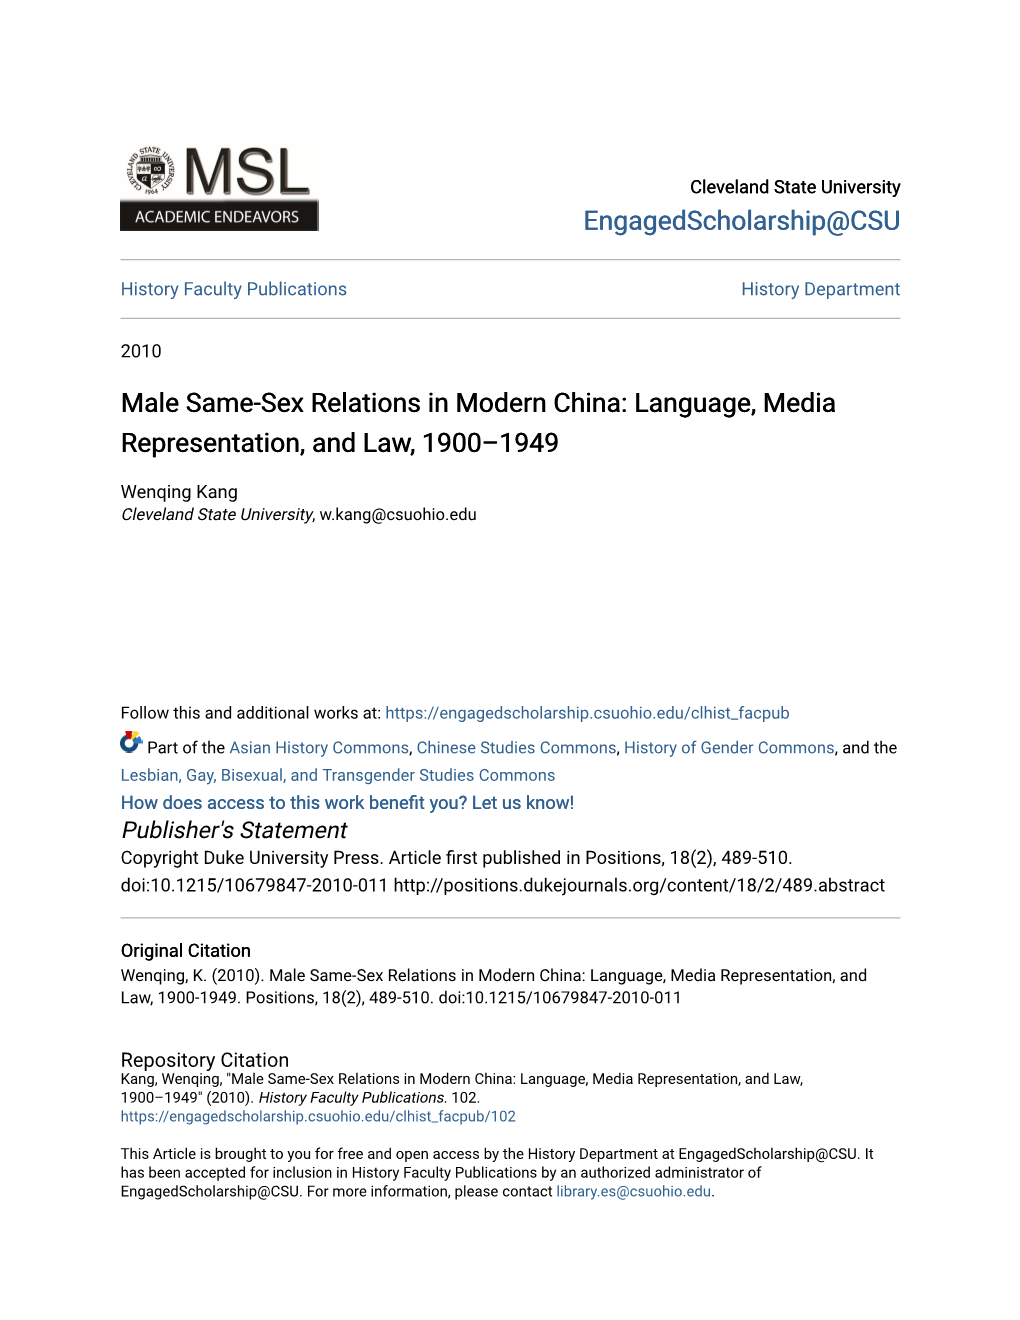 Male Same-Sex Relations in Modern China: Language, Media Representation, and Law, 1900–1949